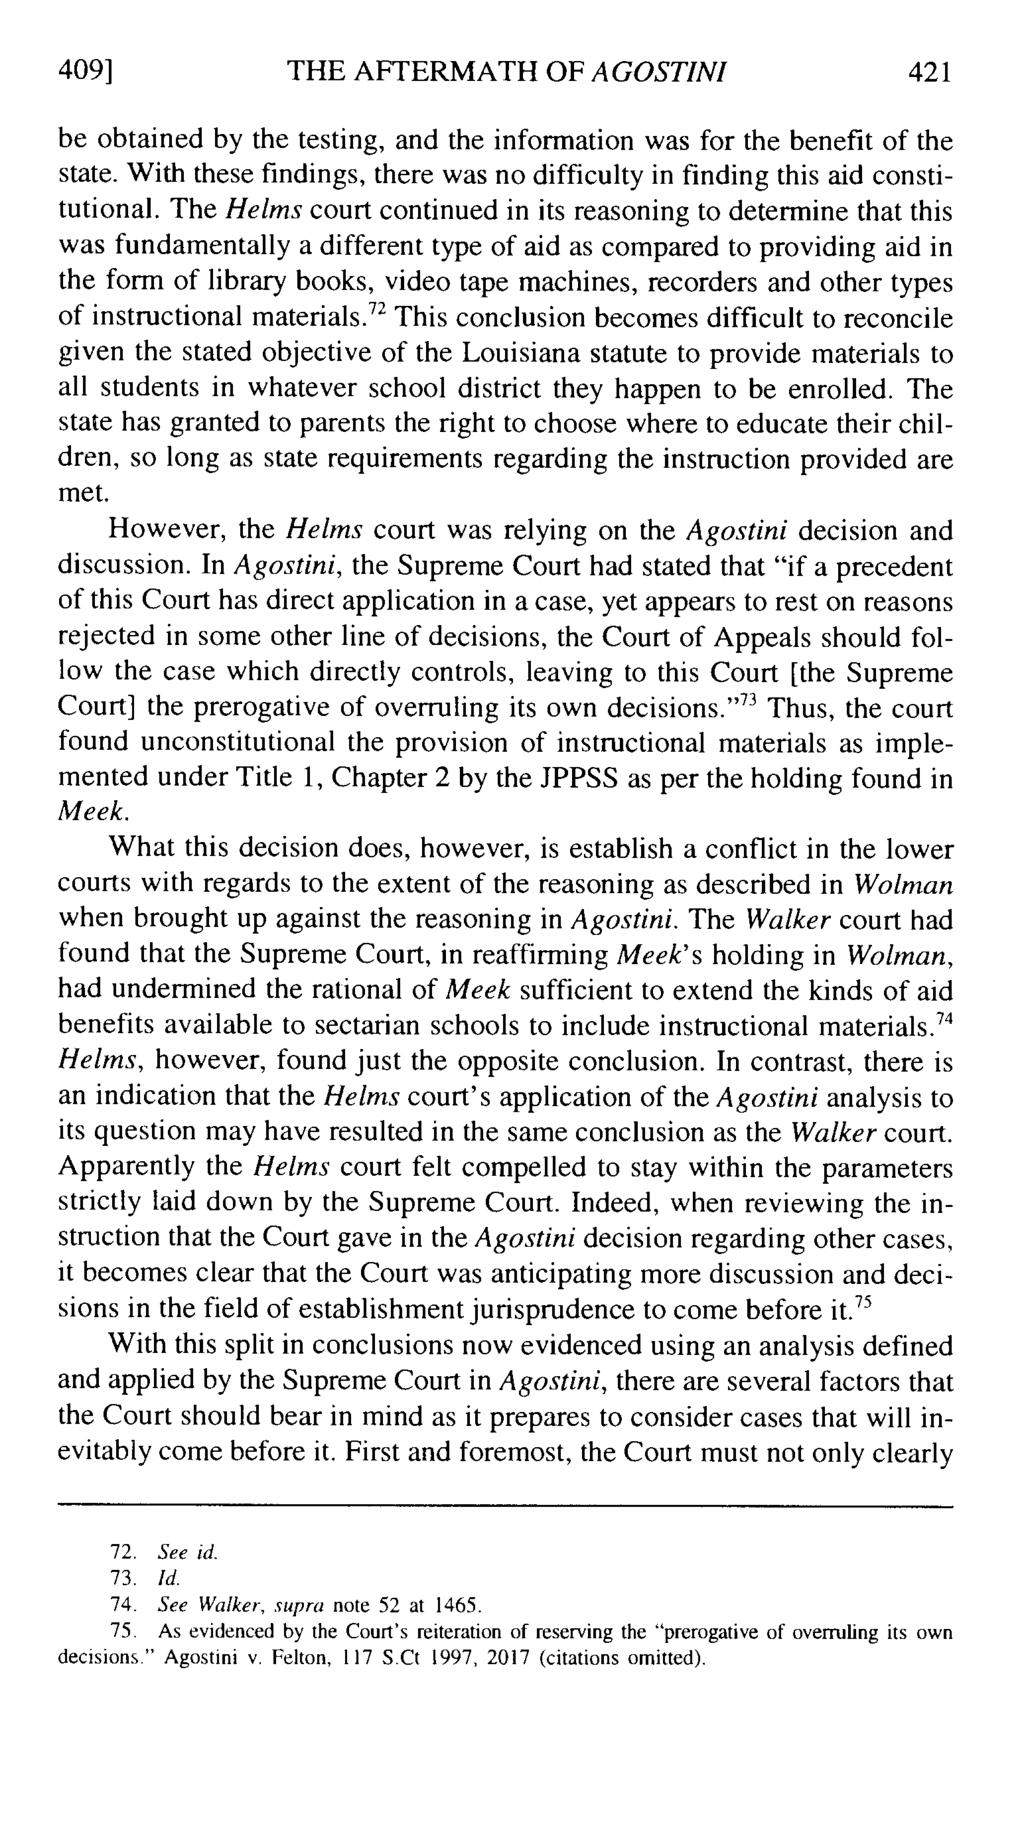 409] THE AFTERMATH OF AGOSTINI 421 be obtained by the testing, and the information was for the benefit of the state. With these findings, there was no difficulty in finding this aid constitutional.